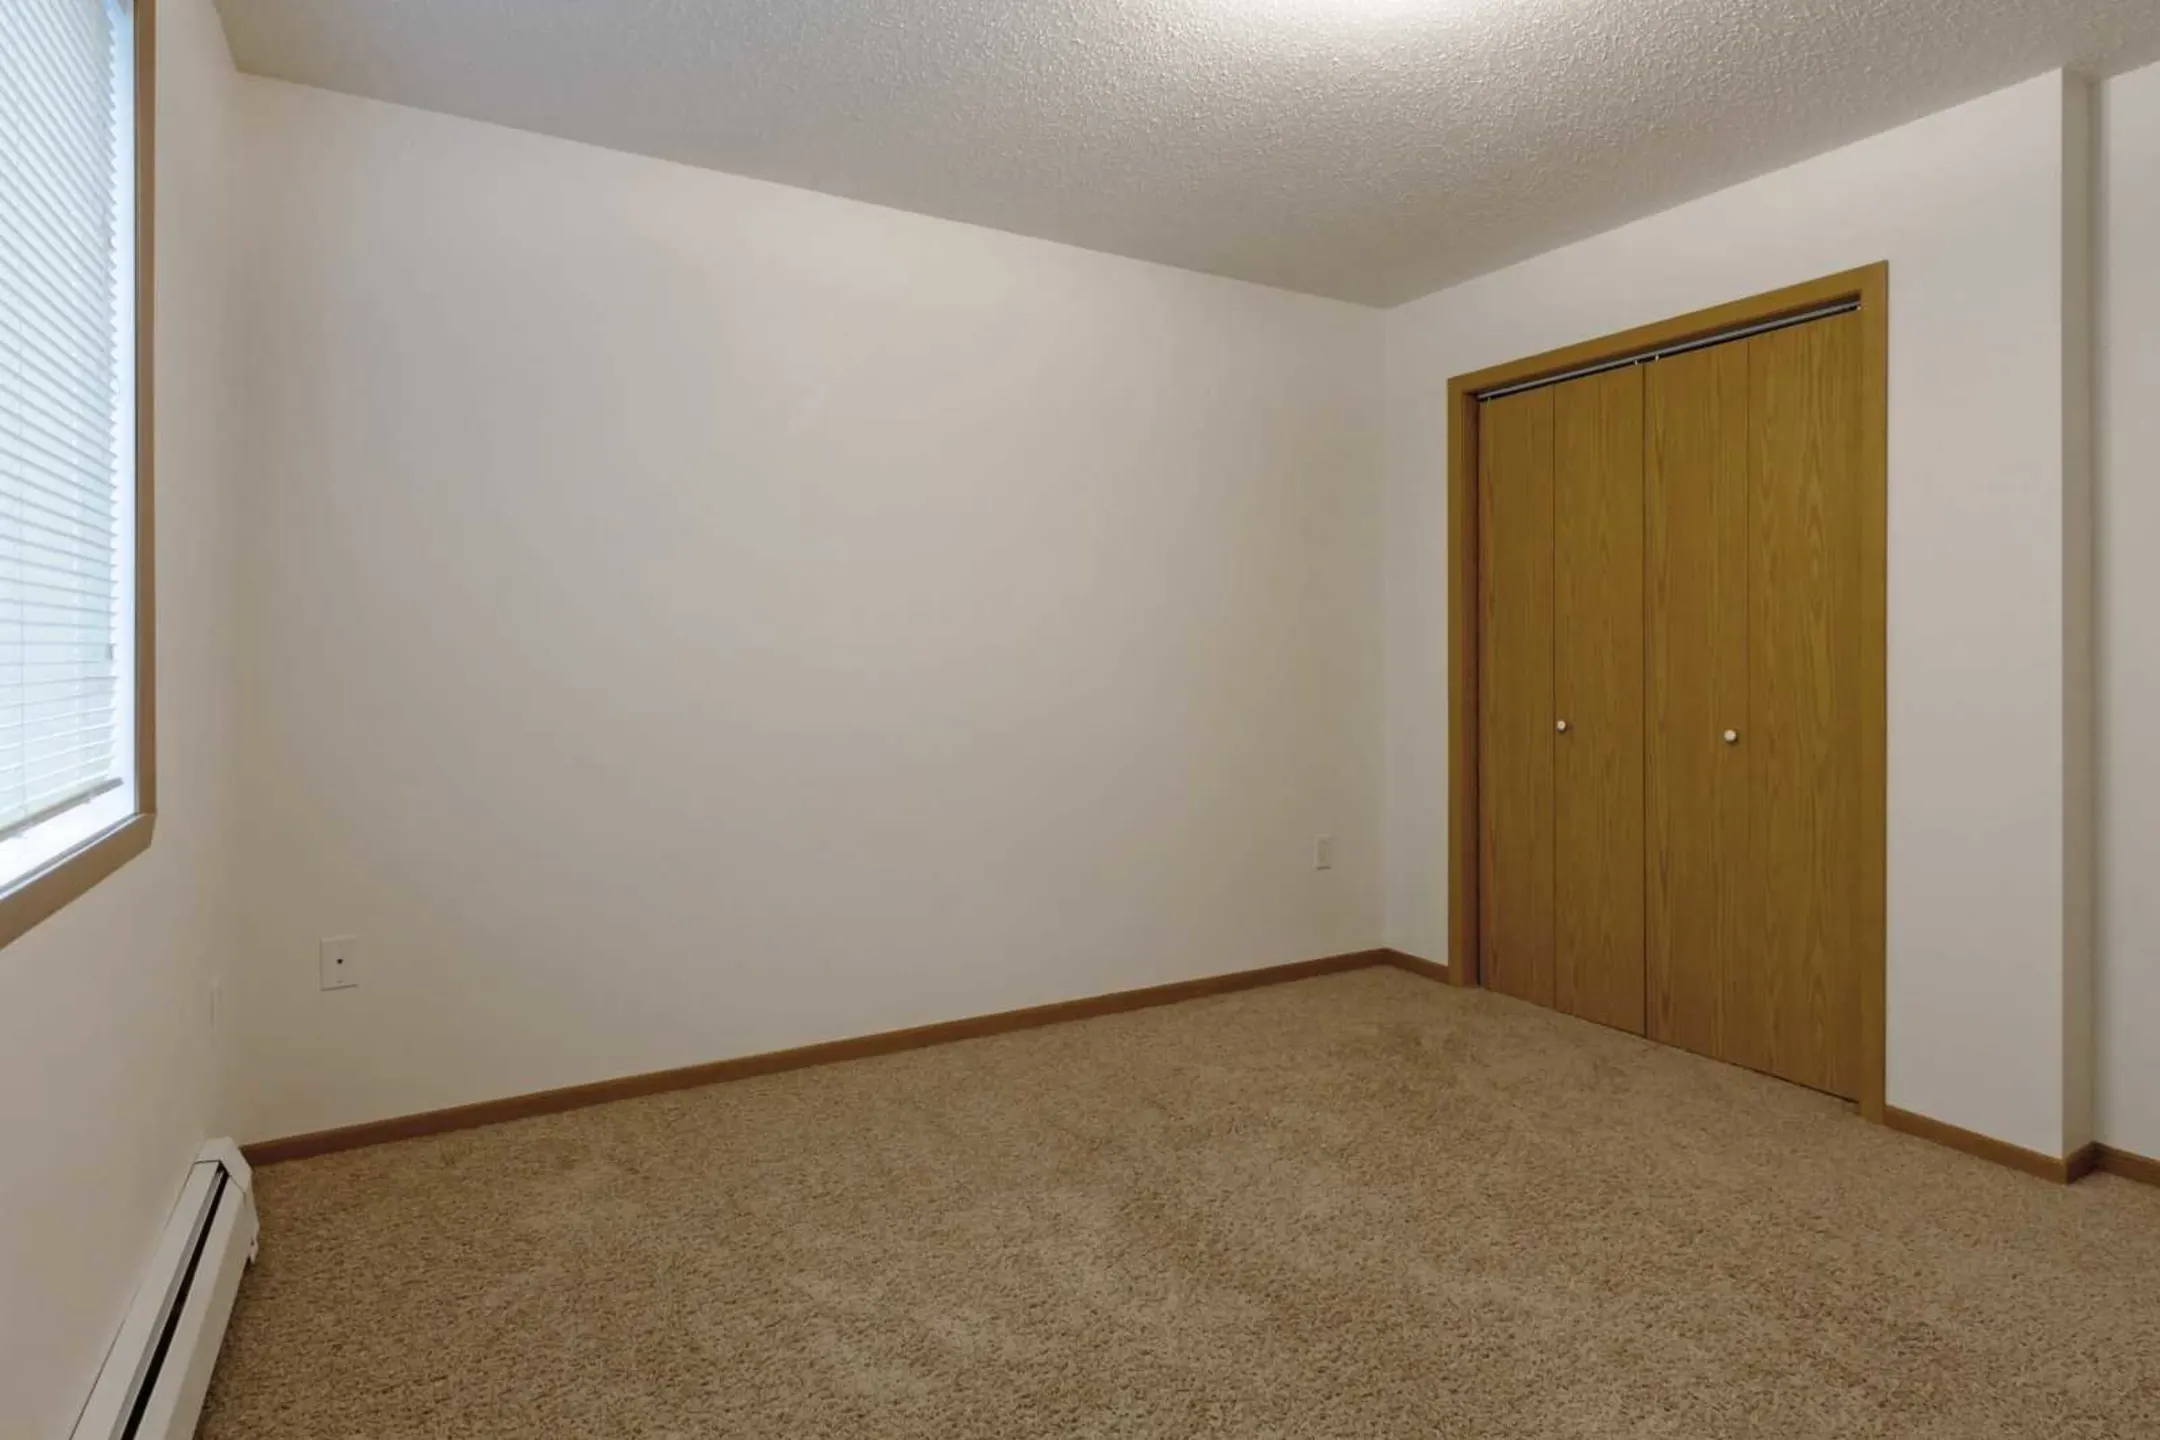 Bedroom - The Woods Apartments - Fargo, ND